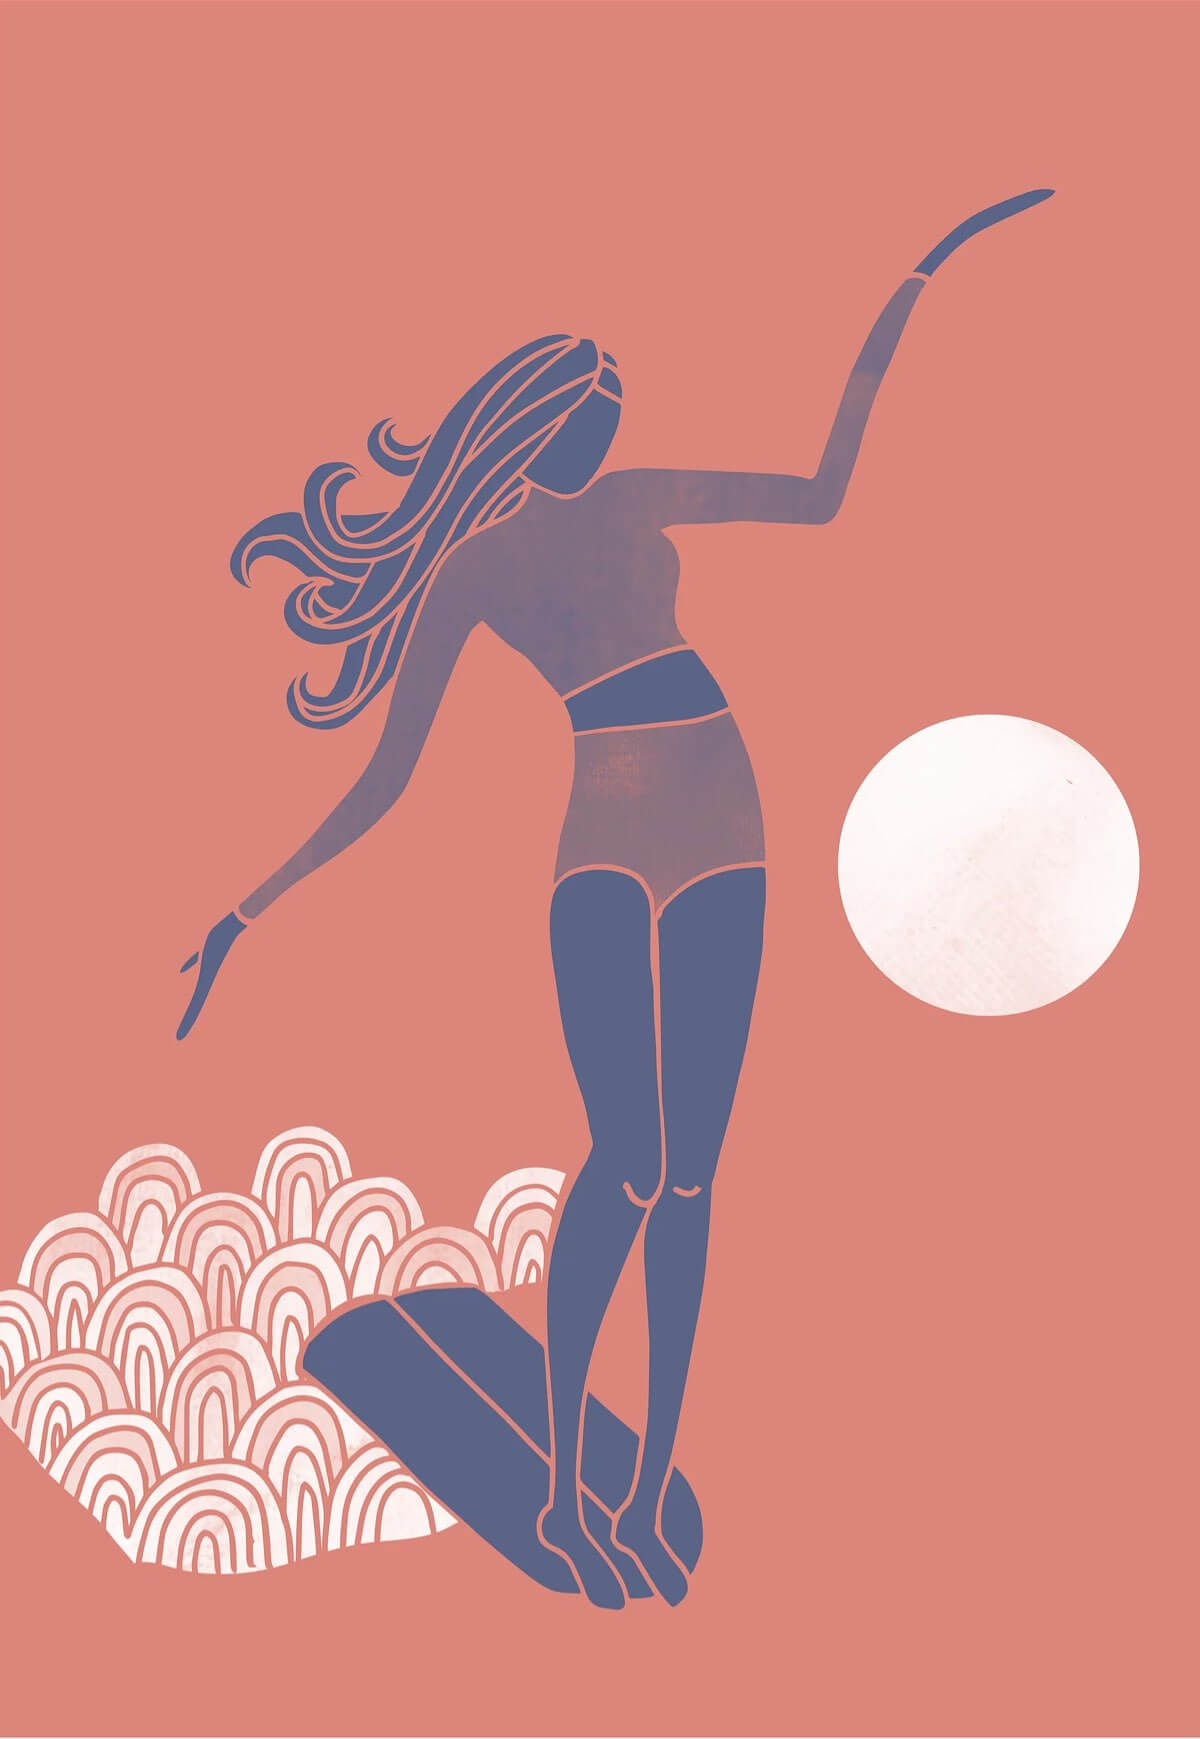 Surf illustration by Lizzy Artwork